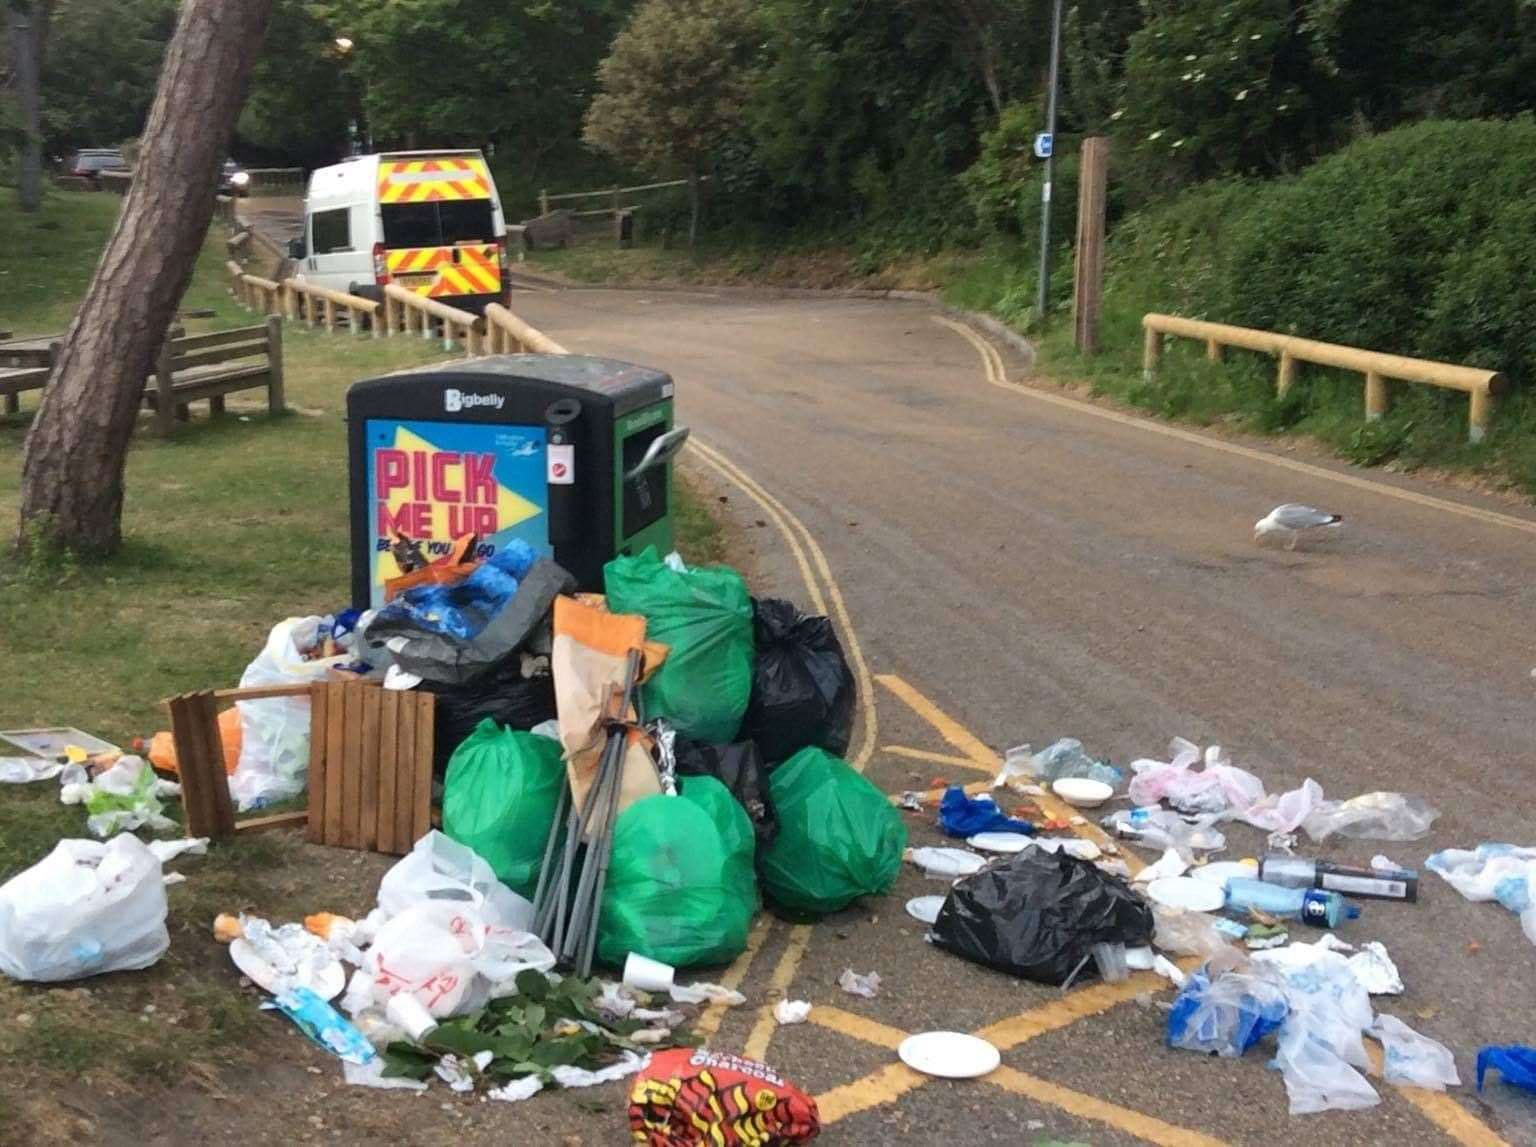 Overflowing bins were also creating problems in the coastal park. Picture: Cllr Tim Prater